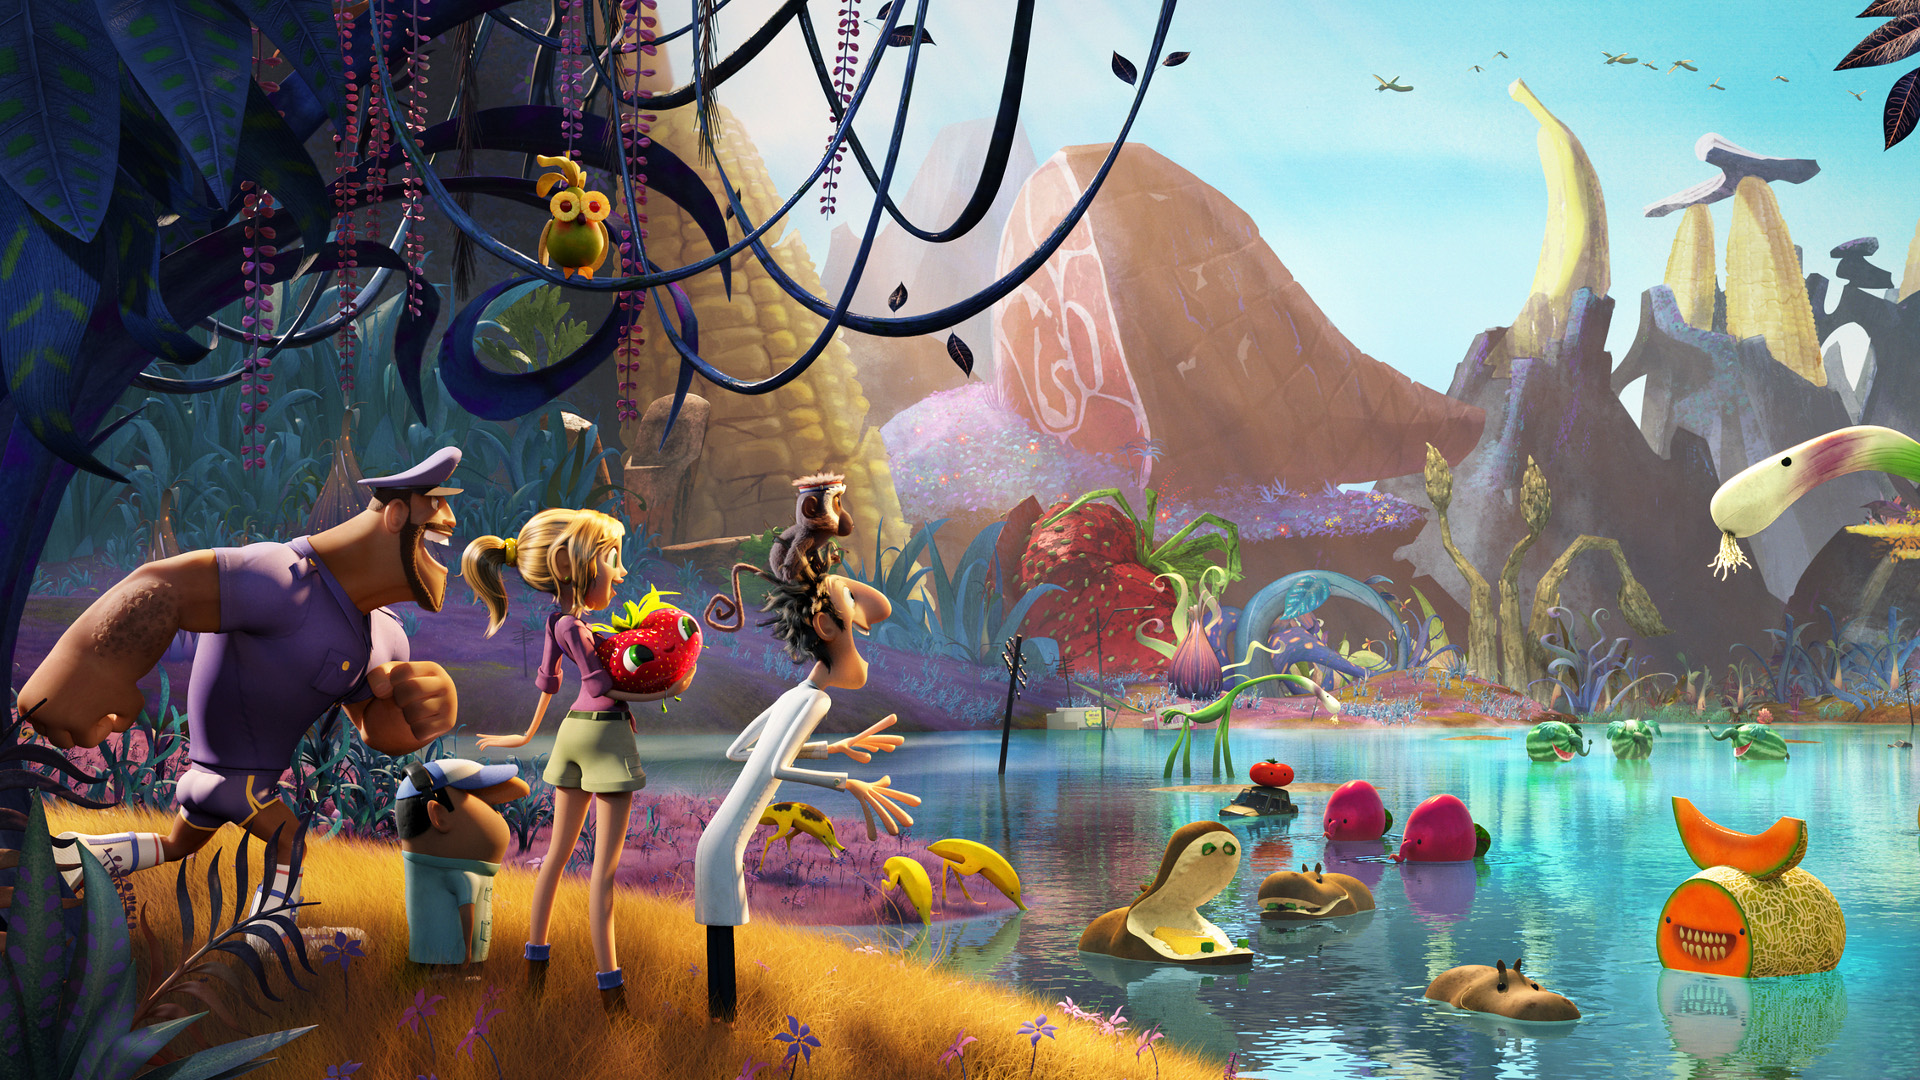 Cloudy with a Chance of Meatballs 2 Image - ID: 83283 - Image Abyss.